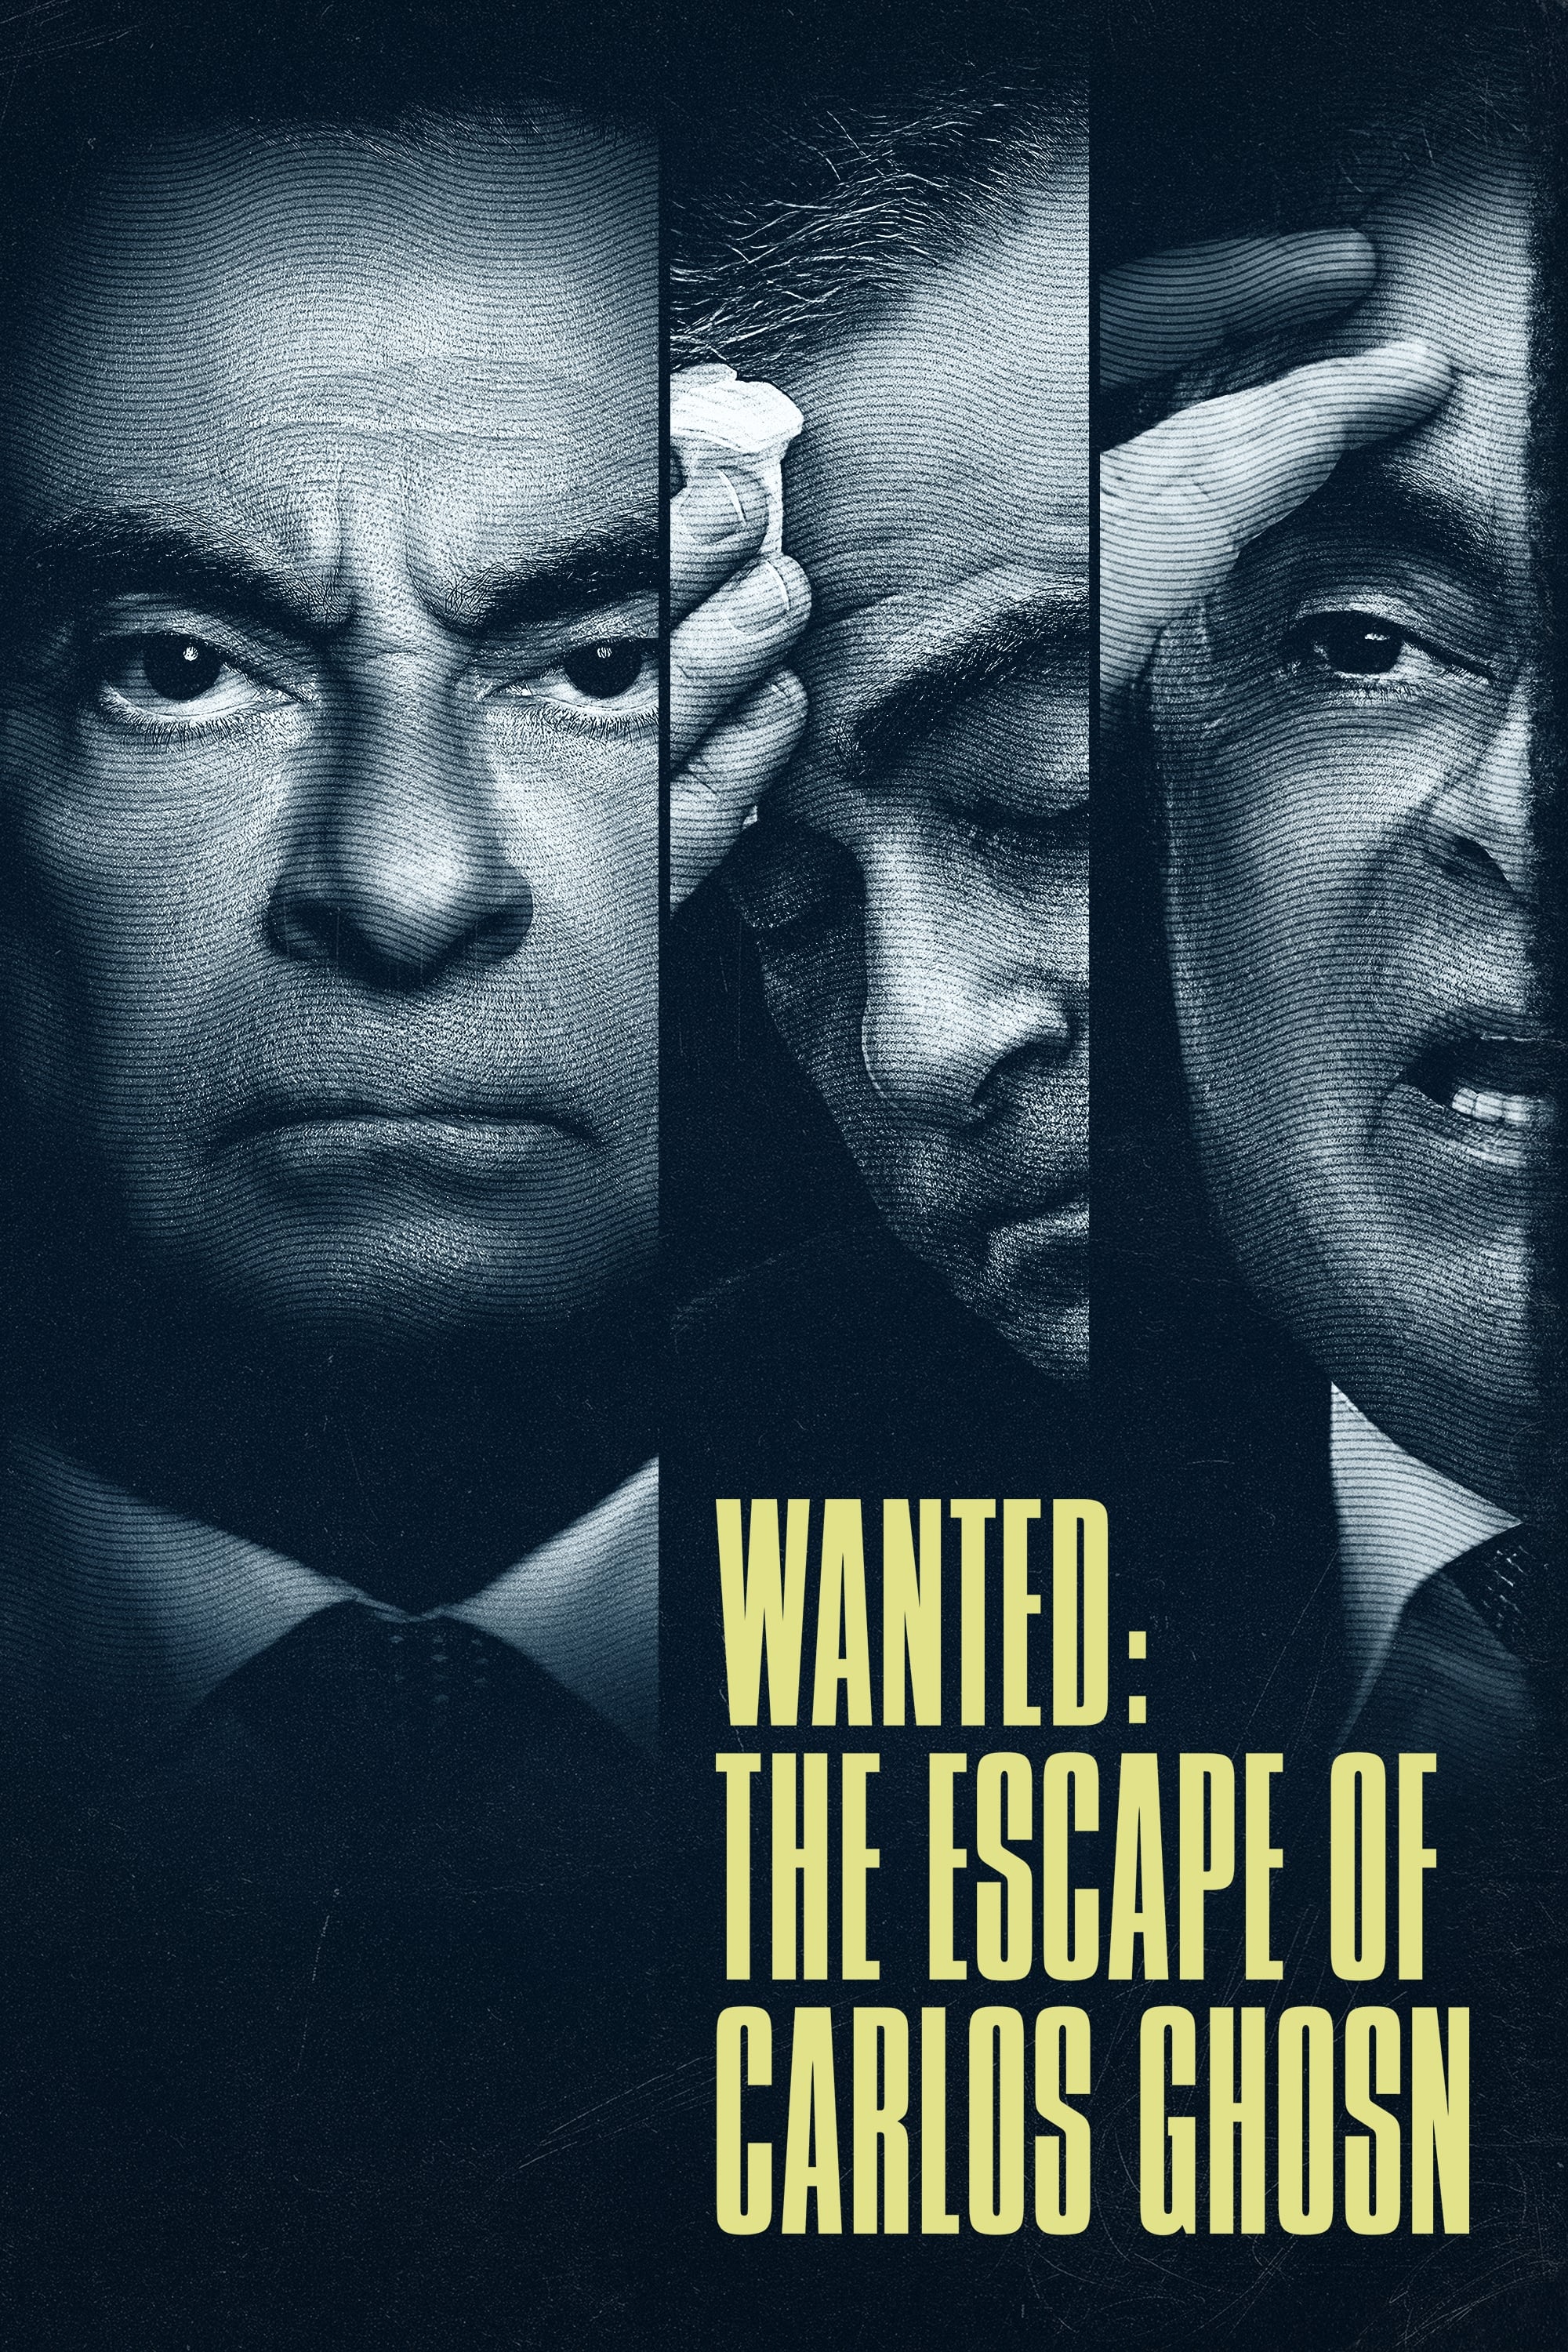 Wanted: The Escape of Carlos Ghosn TV Shows About Miniseries